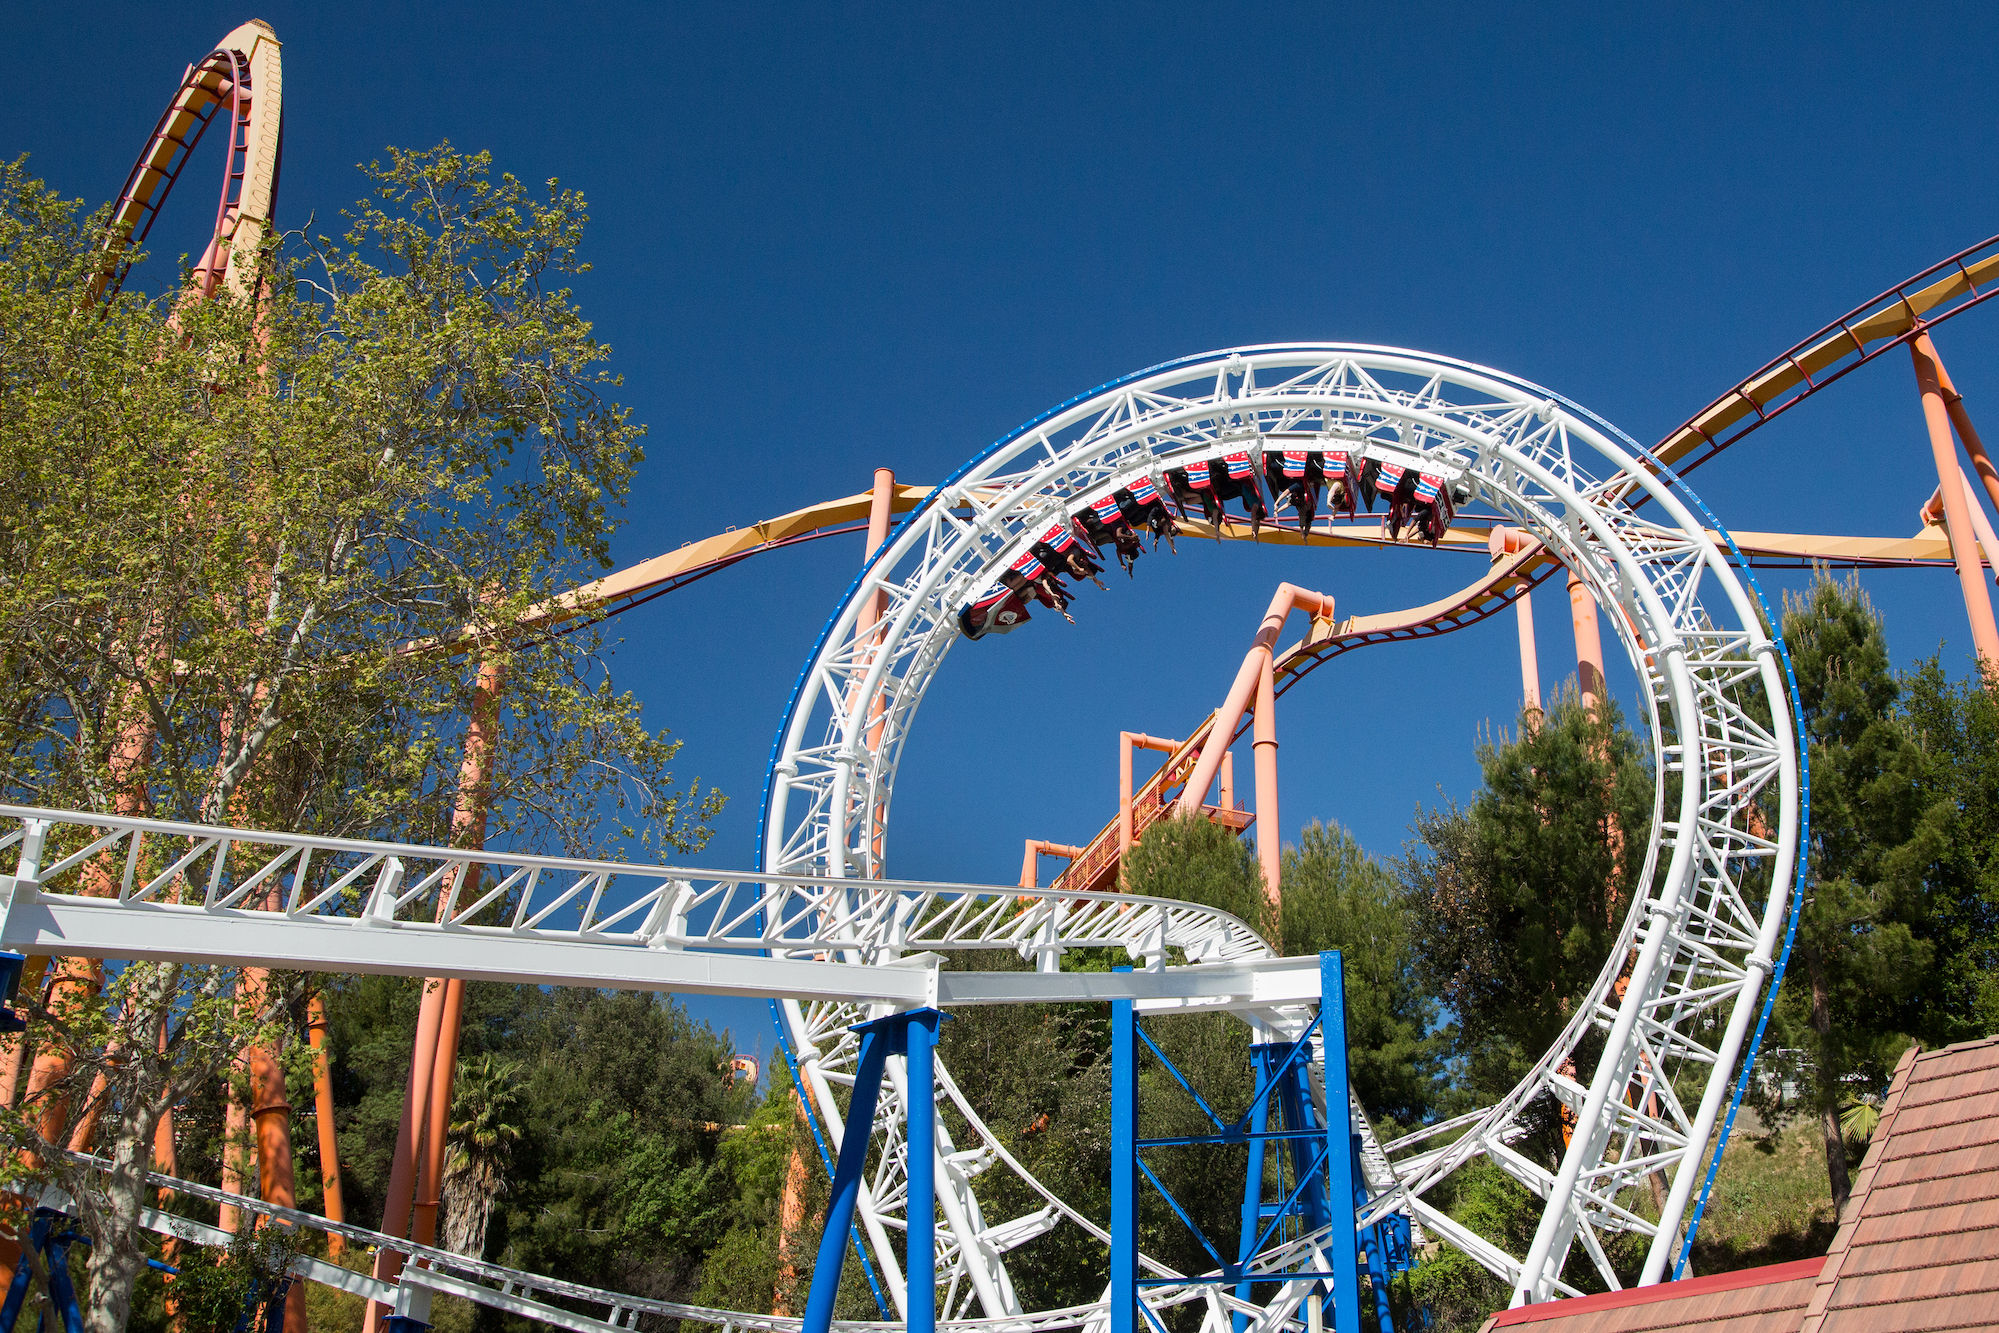 The loop of the roller coaster Revolution at Six Flags Magic Mountain